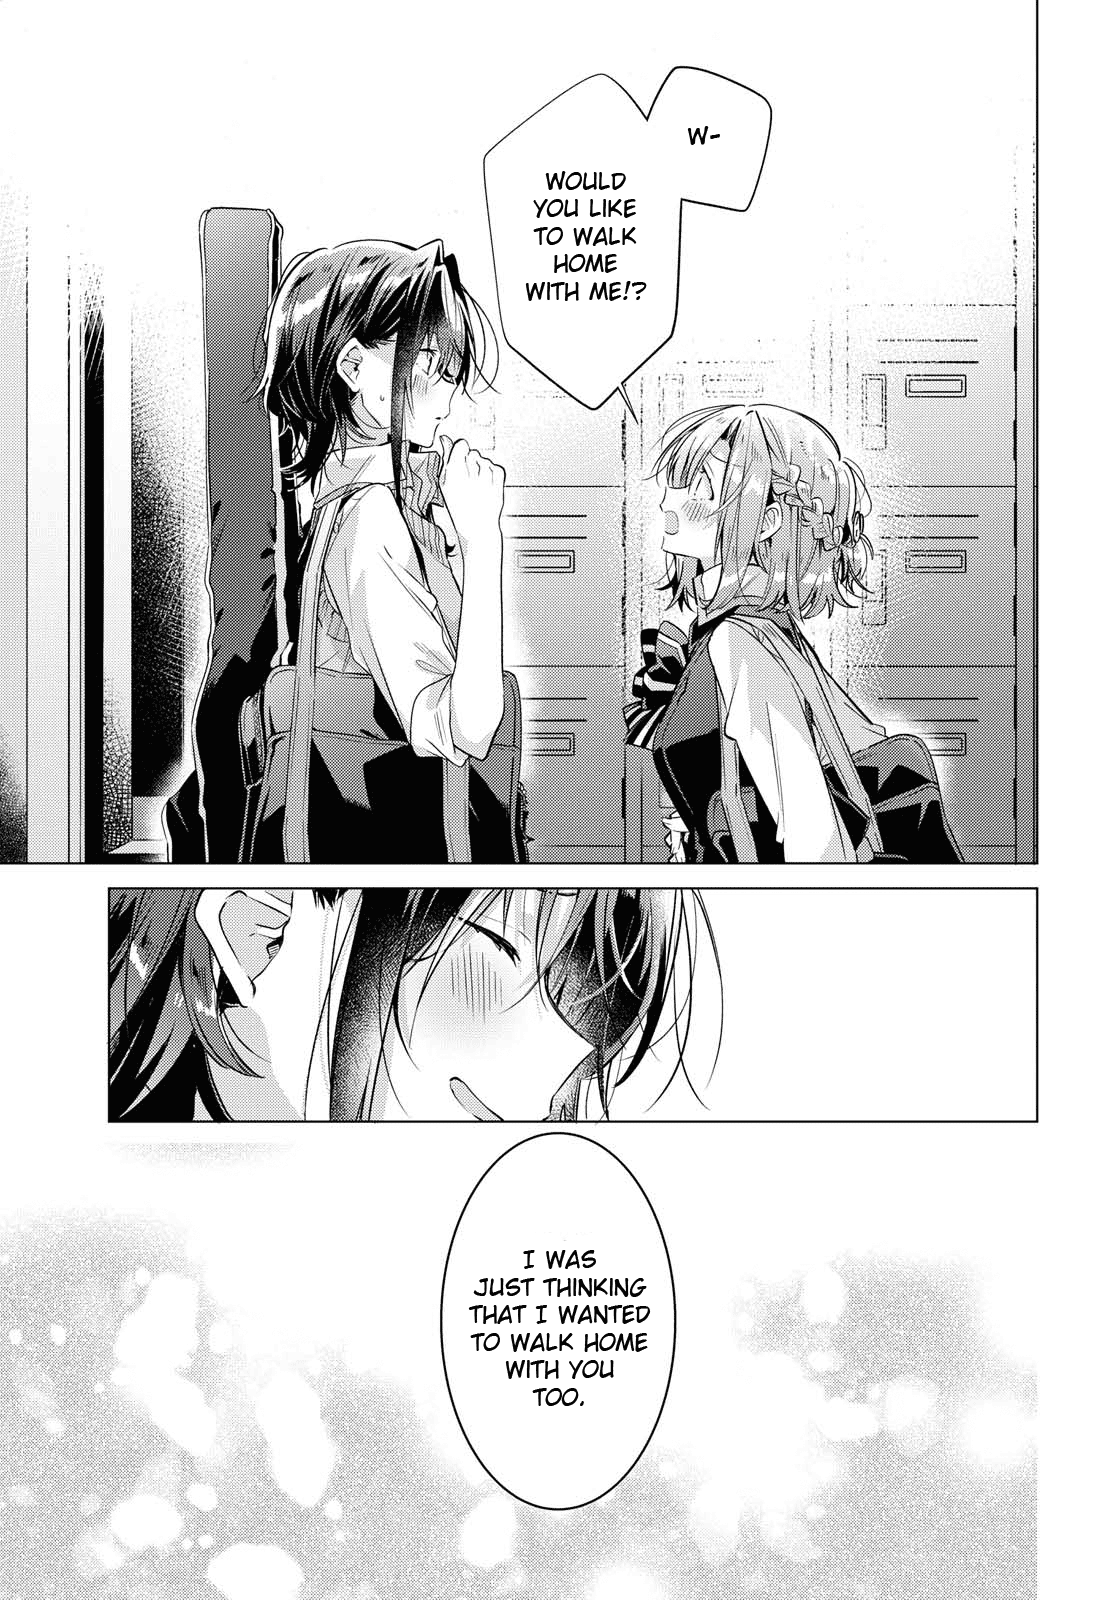 Whispering You A Love Song - Page 3